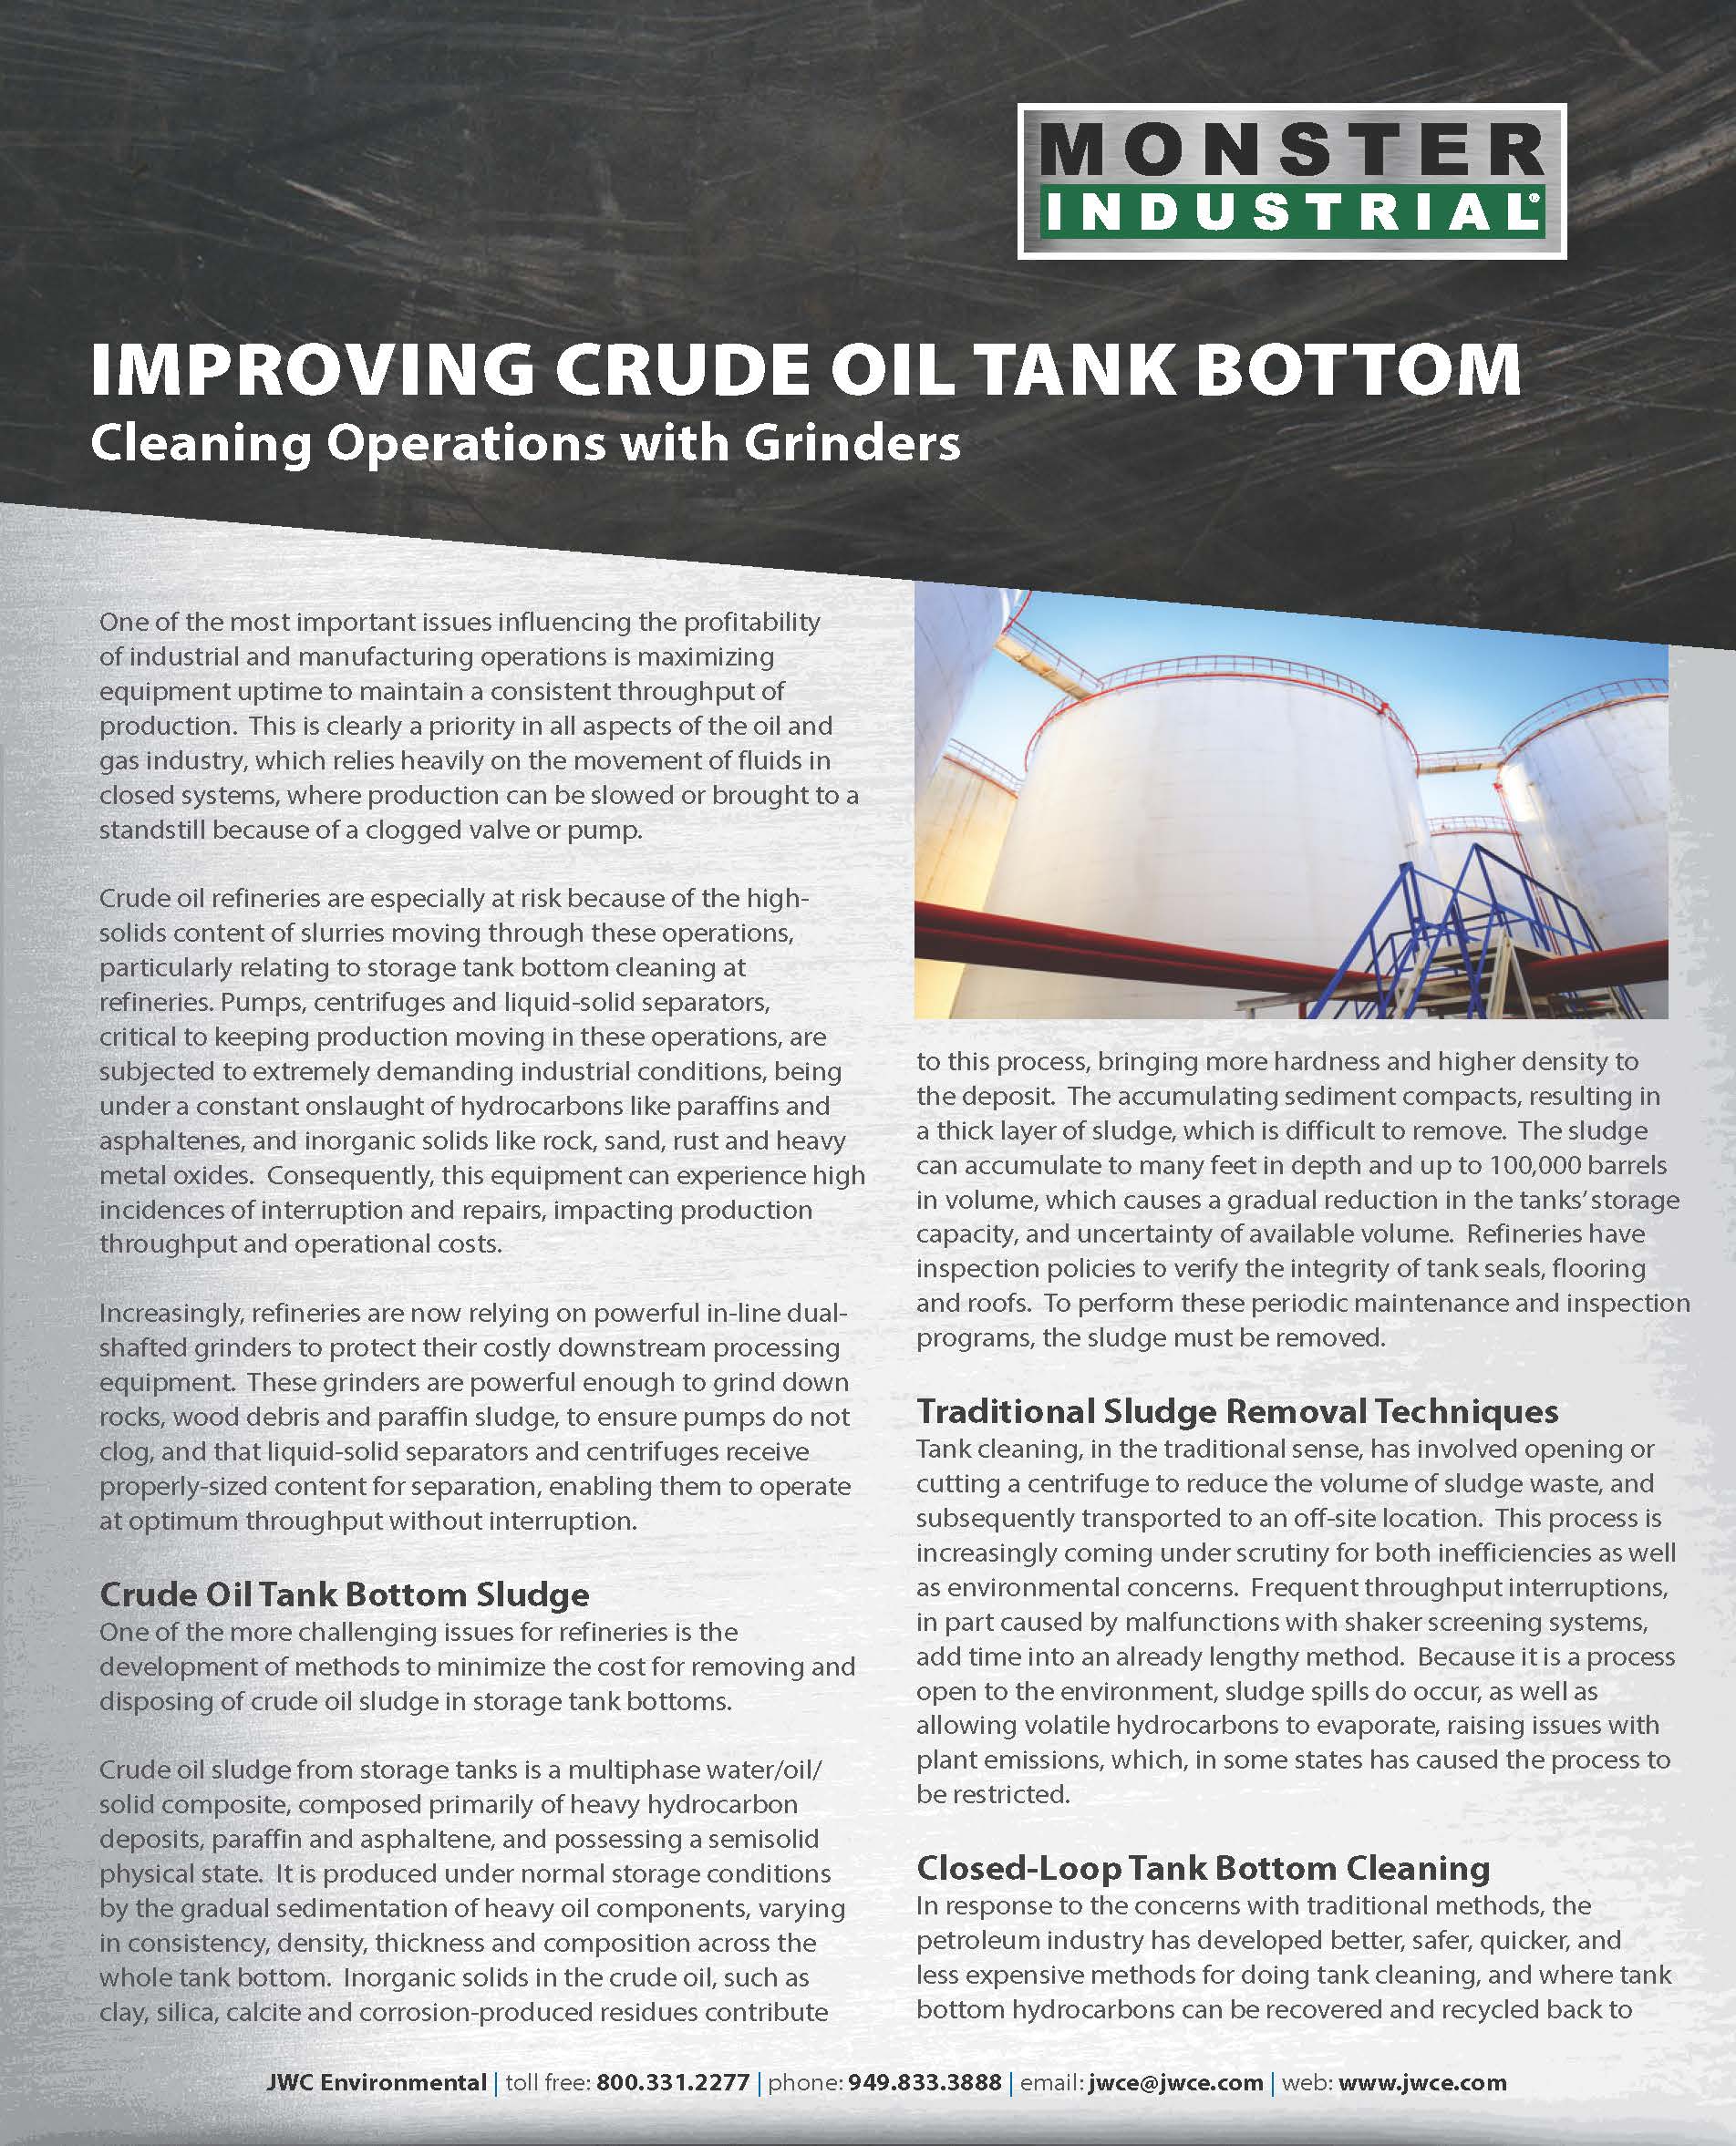 Case Study: Improving Pump and Centrifuge Performance in Crude Oil Tank Bottom Cleaning